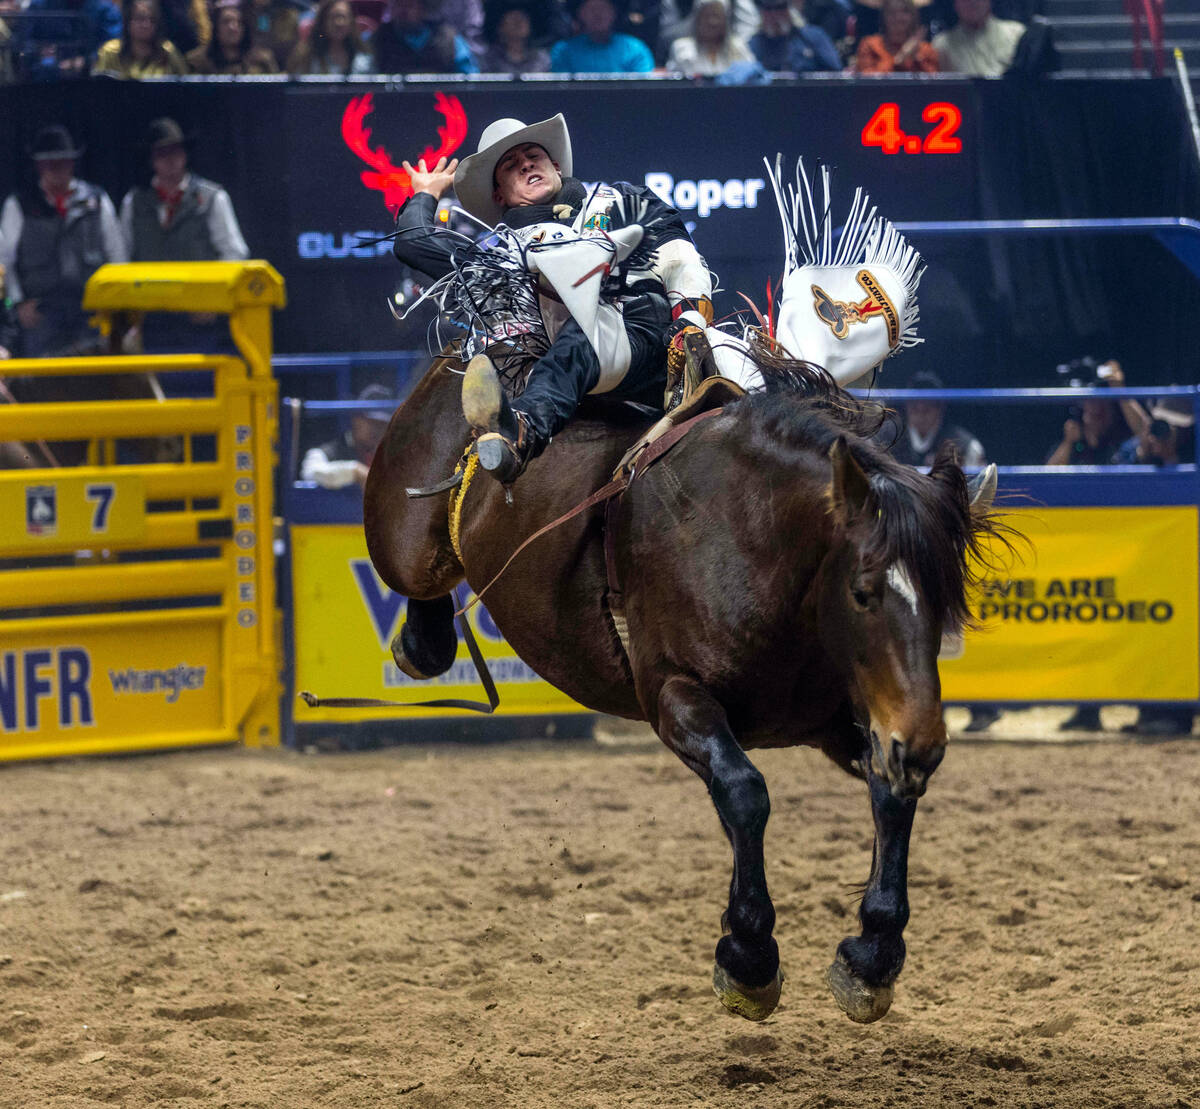 Jayco Roper rides Renovo Night Gazer in Bareback Riding during the final day action of the NFR ...